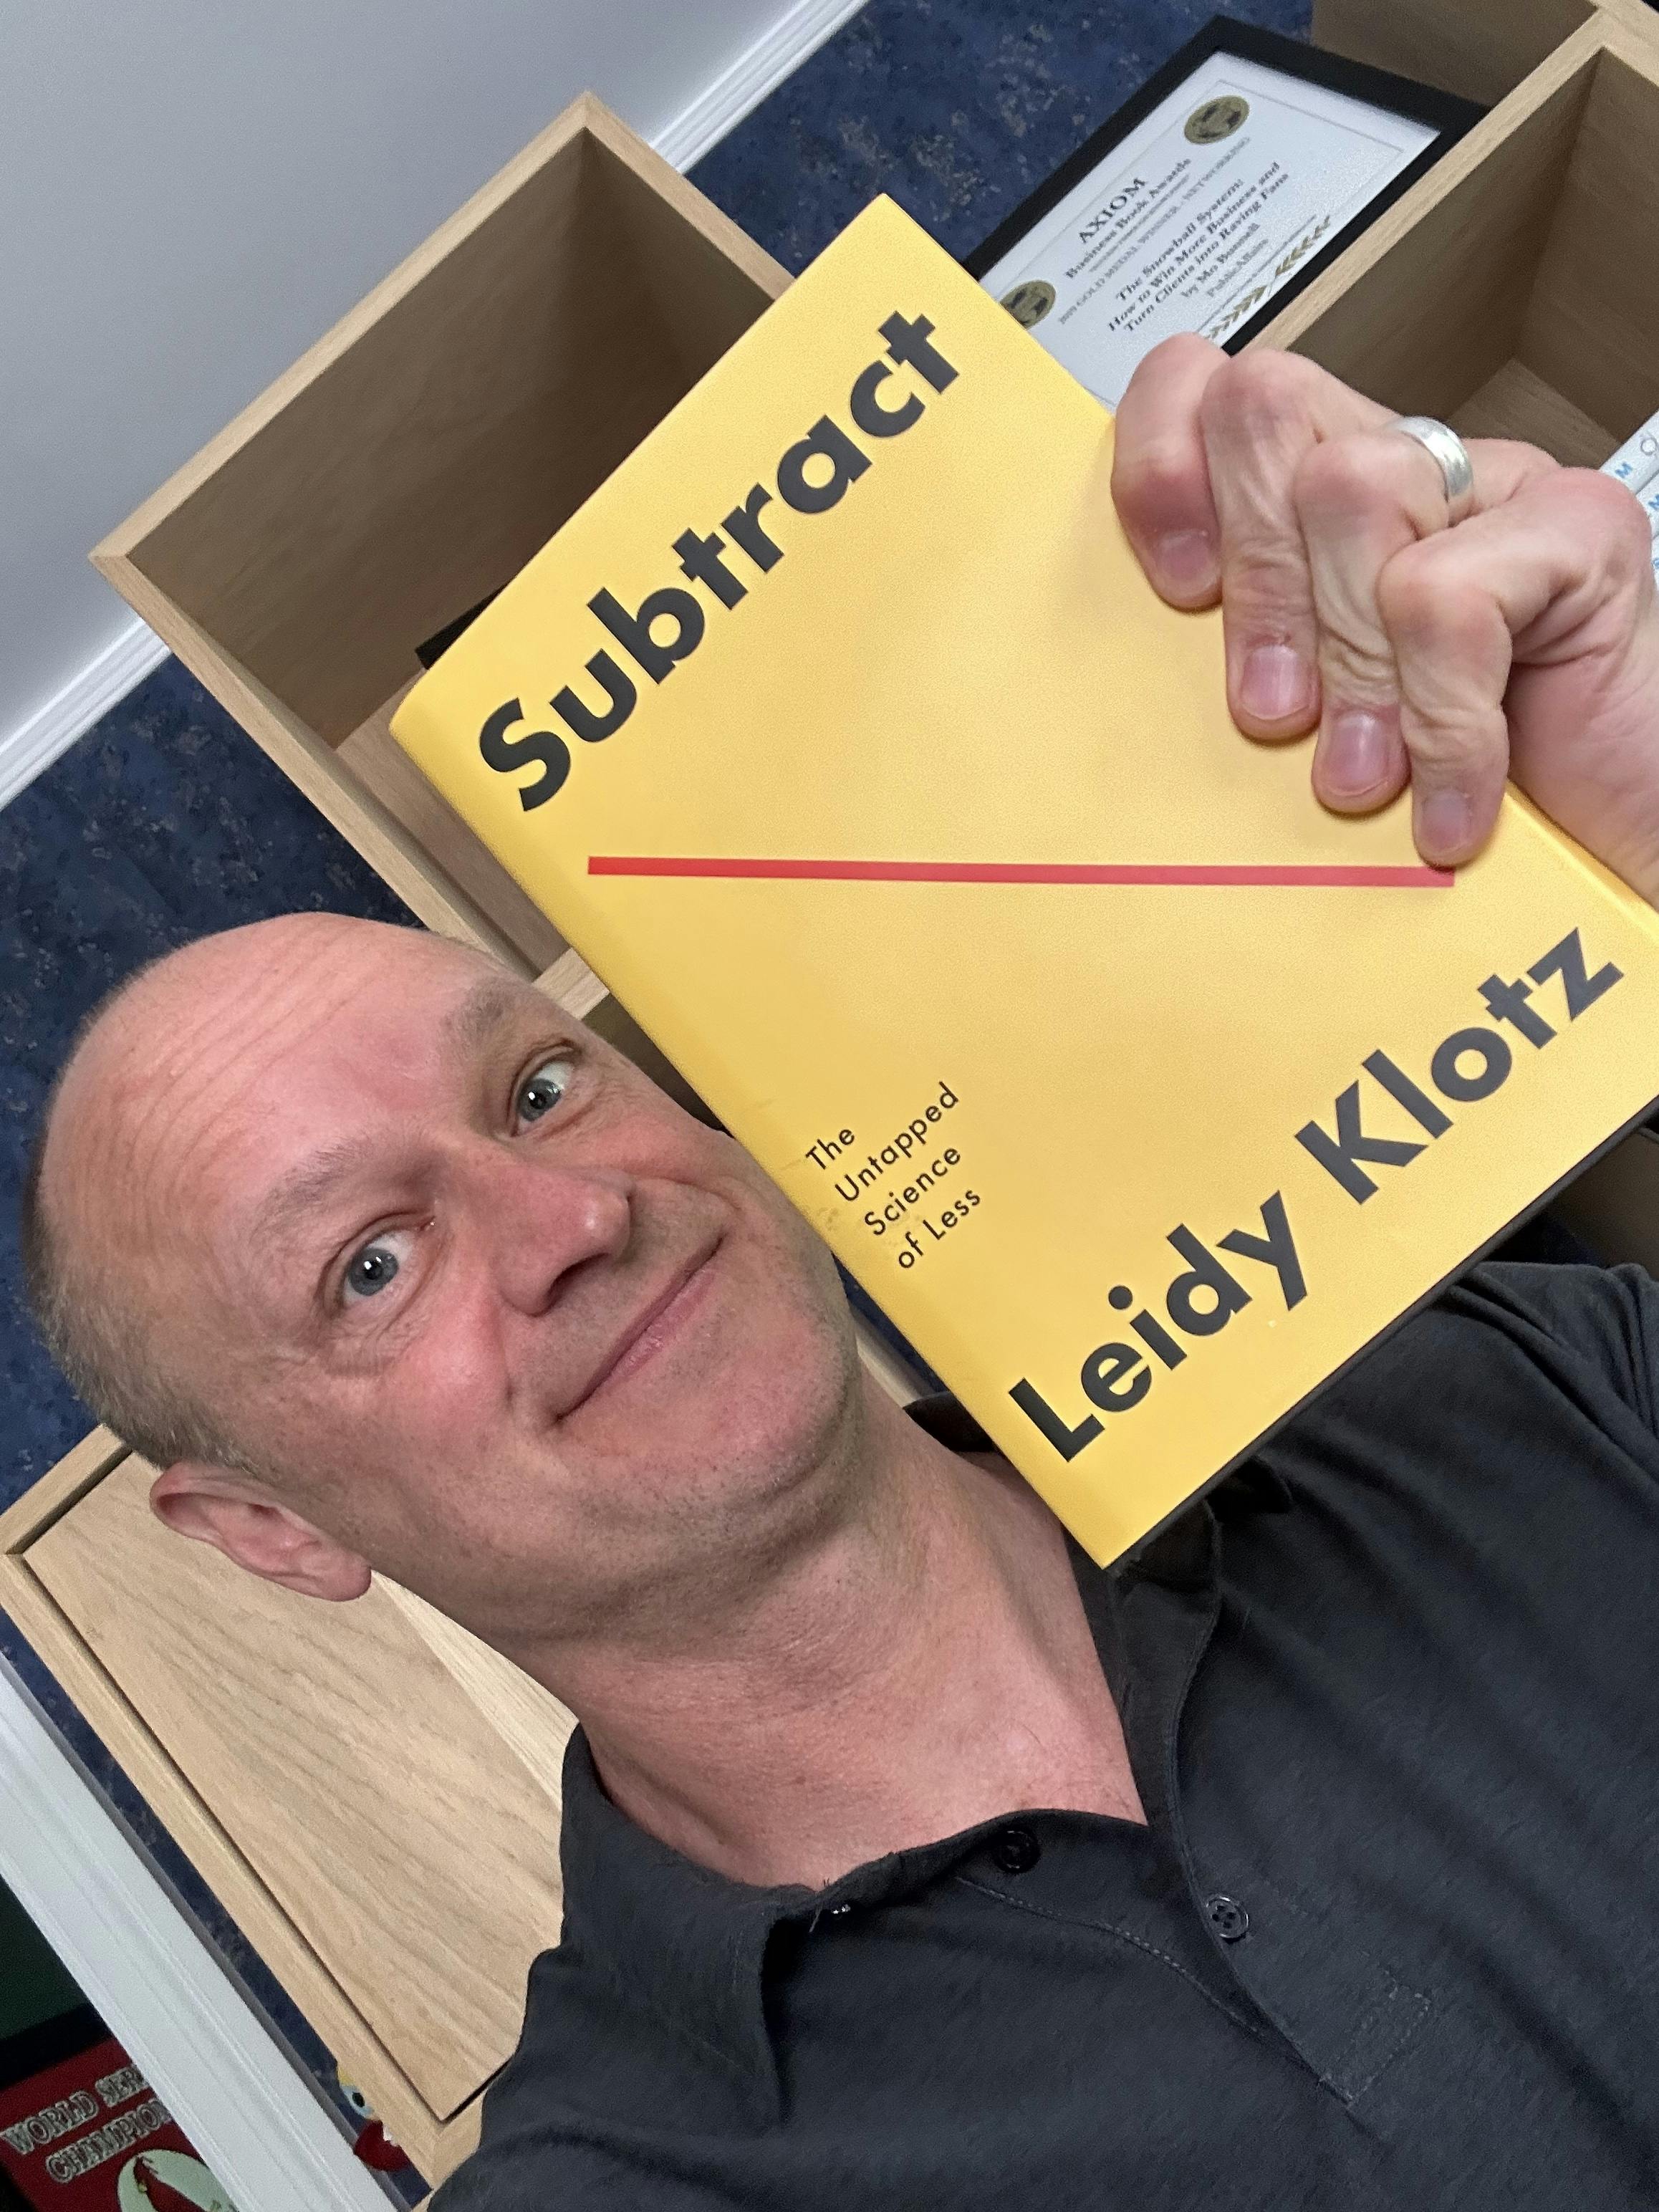 Mo Bunnell posing with Leidy Klotz's book Subtract